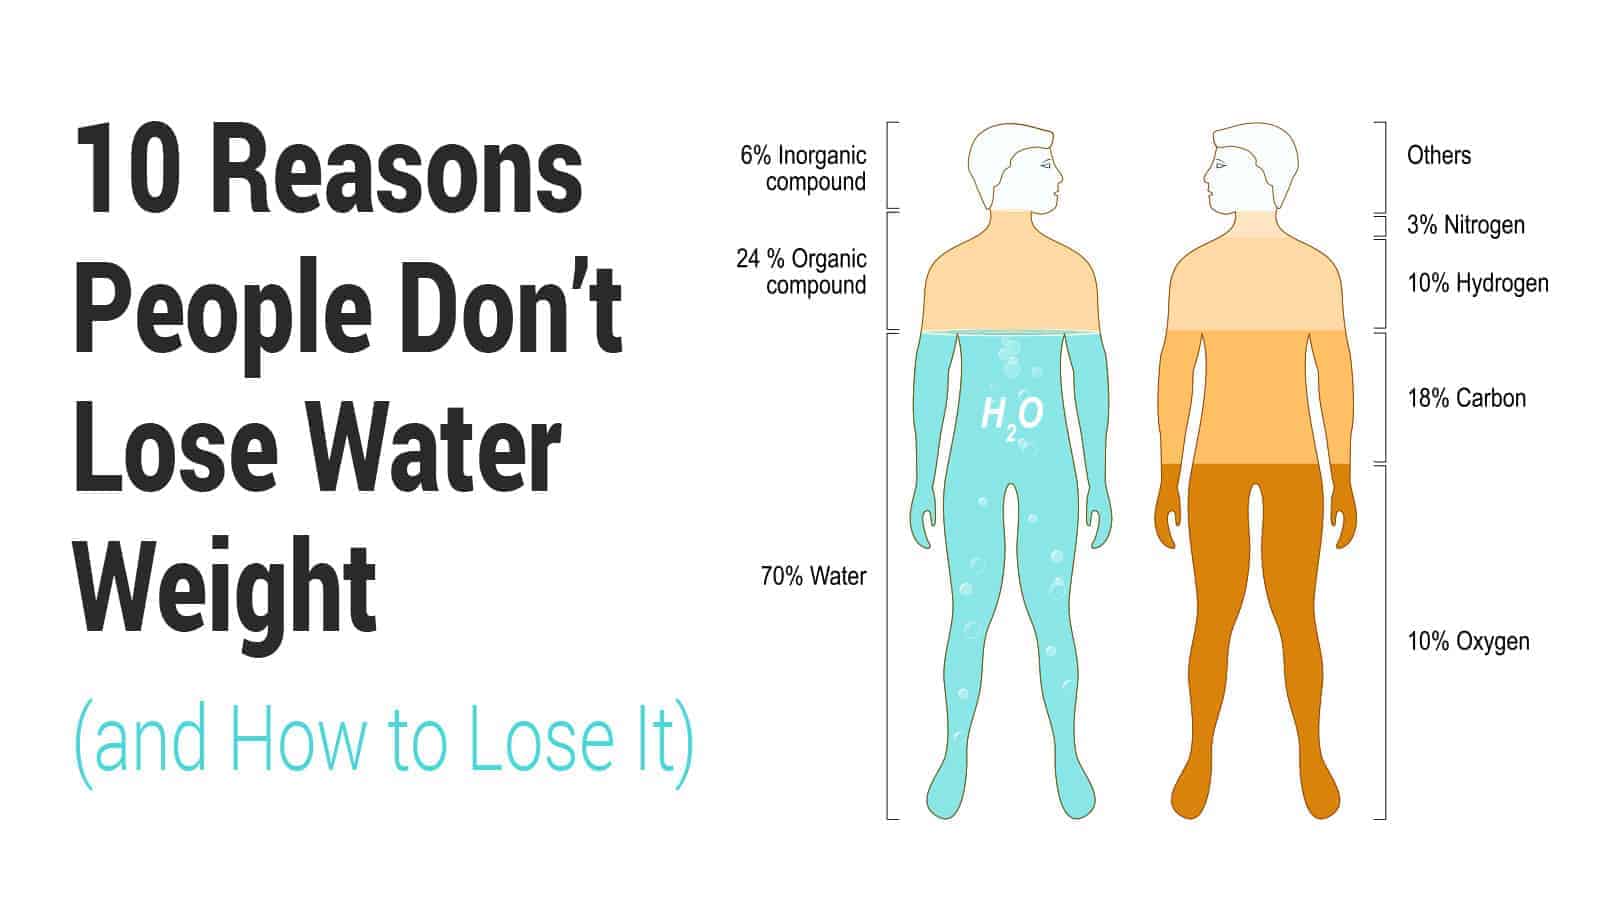 10 Reasons People Don’t Lose Water Weight (and How to Lose It)